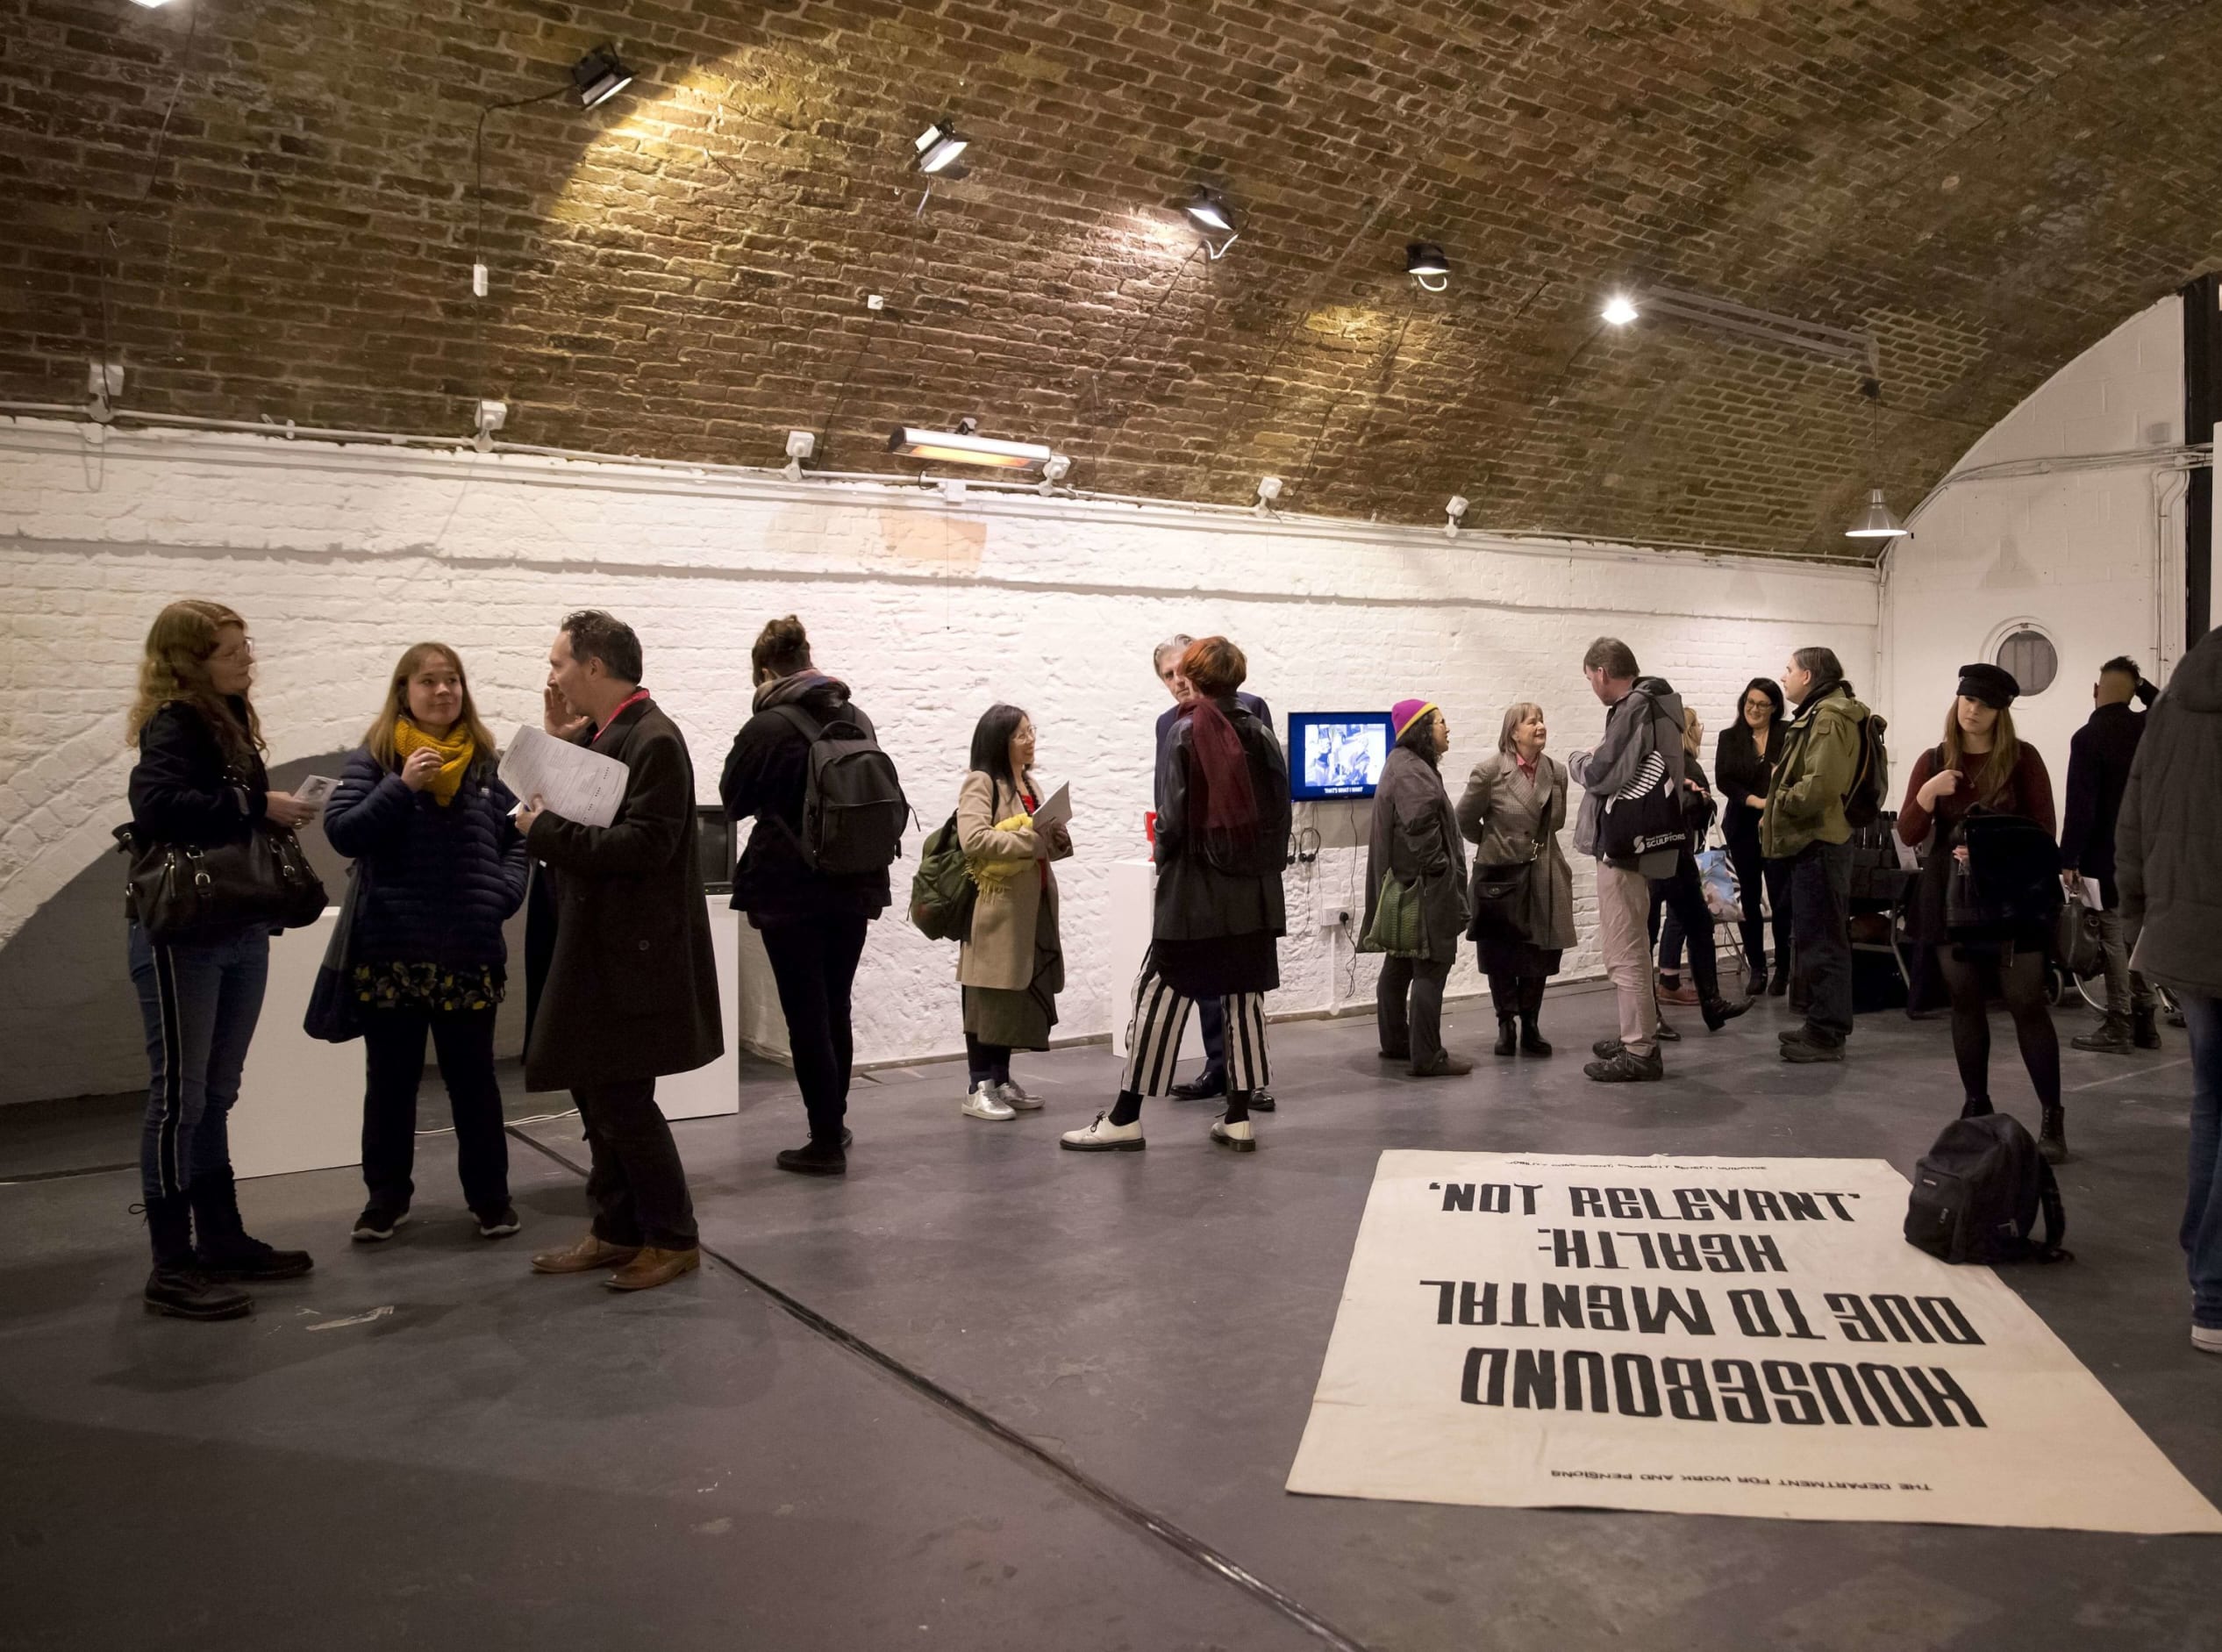 Crowd along side of room chatting to each other at art exhibition Shape Open Retrospective, Hoxton Arches, 2018